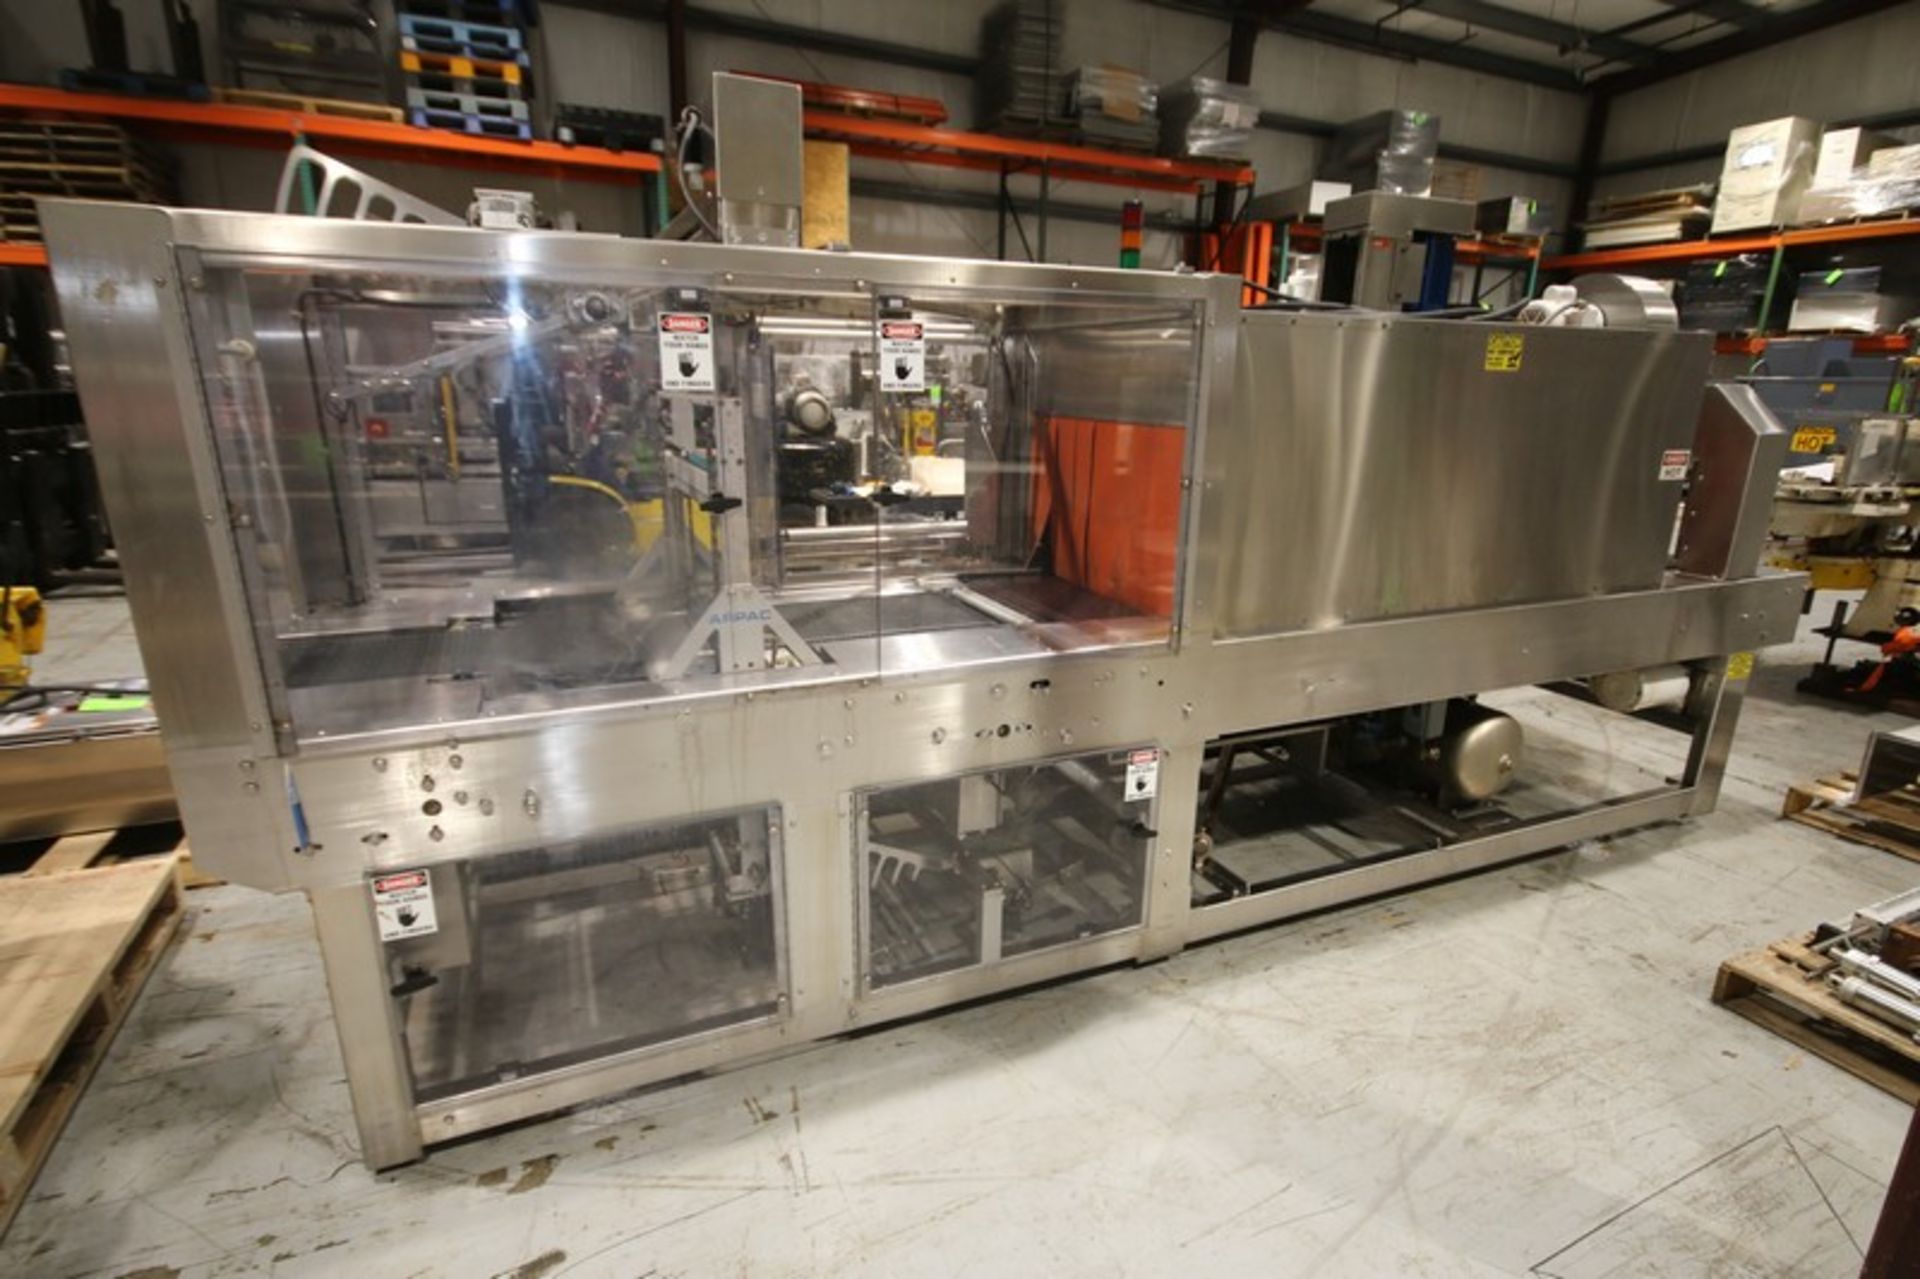 Arpac S/S Shrink Wrapper/Bundler, Model 55TW-24SS, SN 4934, with 16" H Product Height, 2" W Belt, - Image 4 of 14